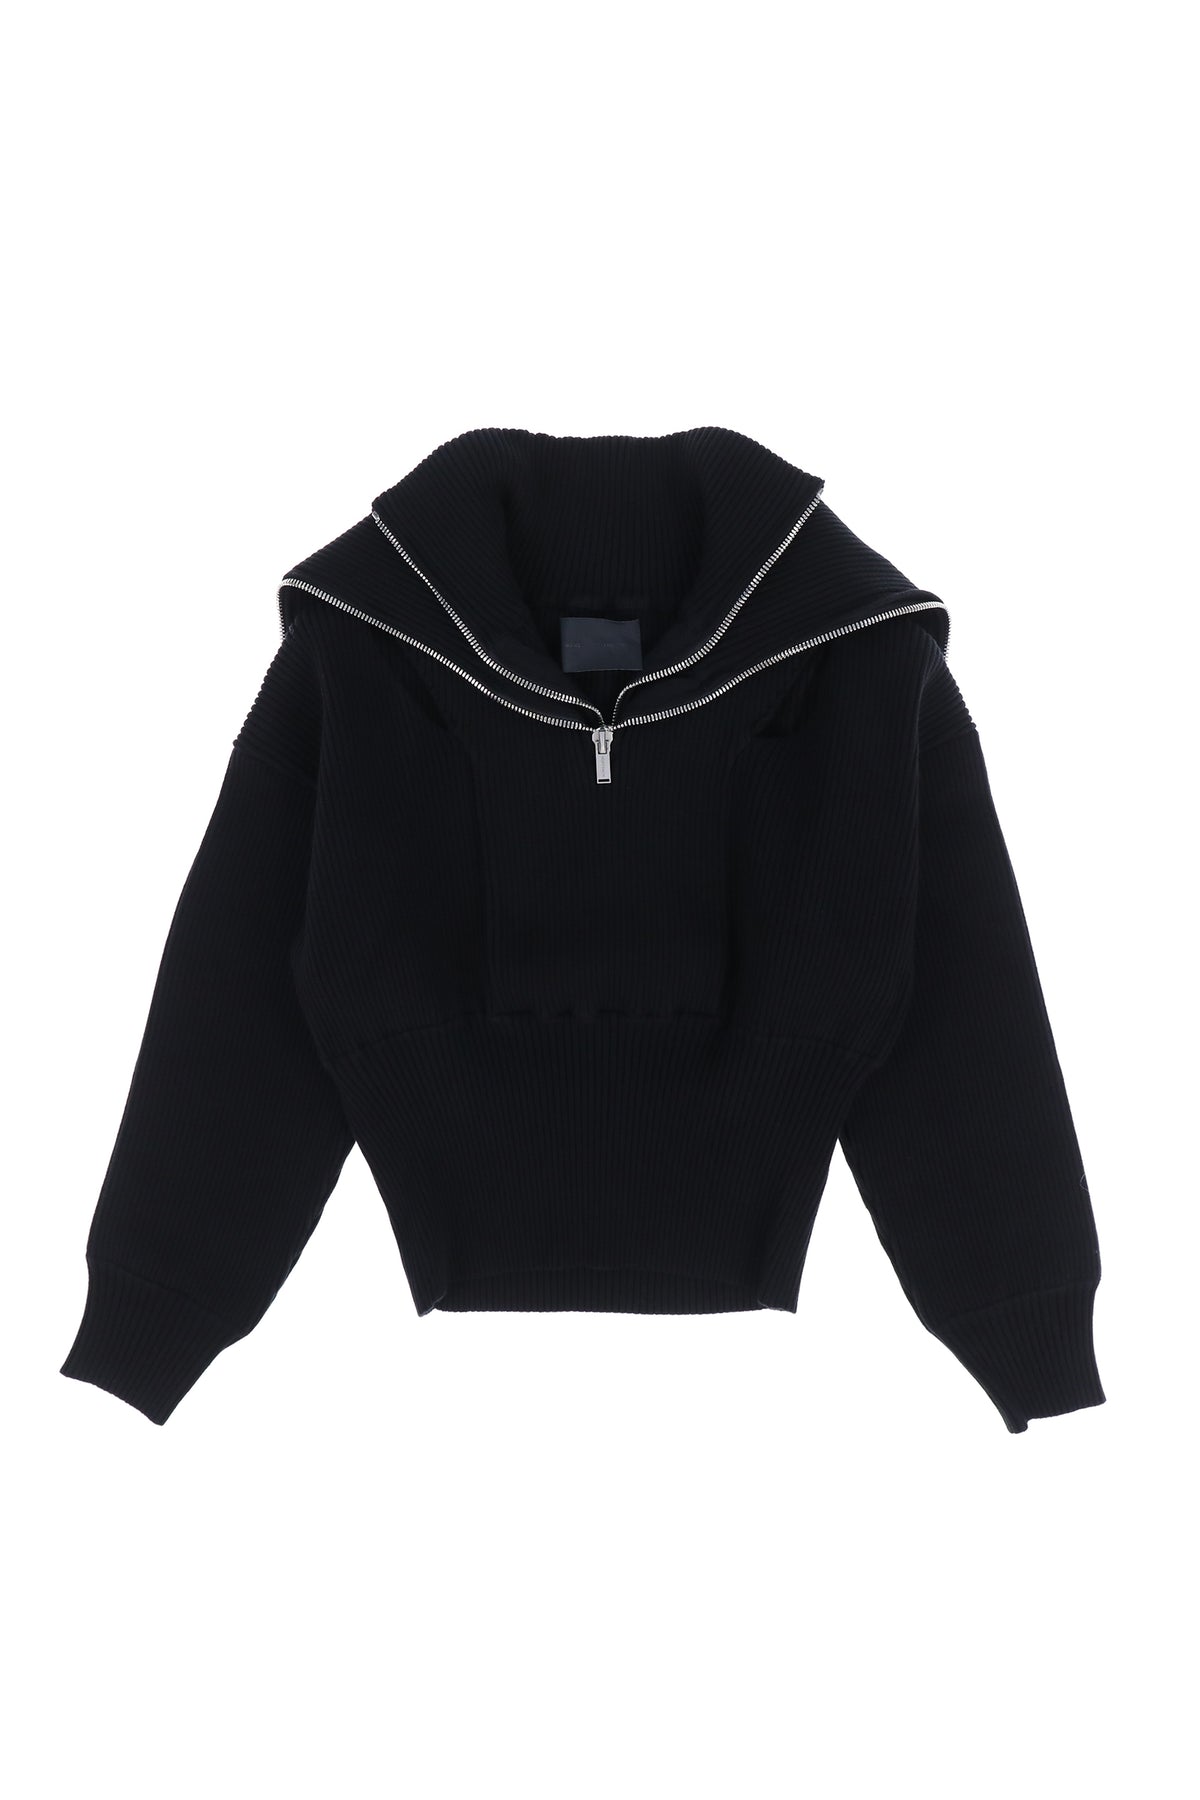 DOUBLE COLLAR KNIT / BLK